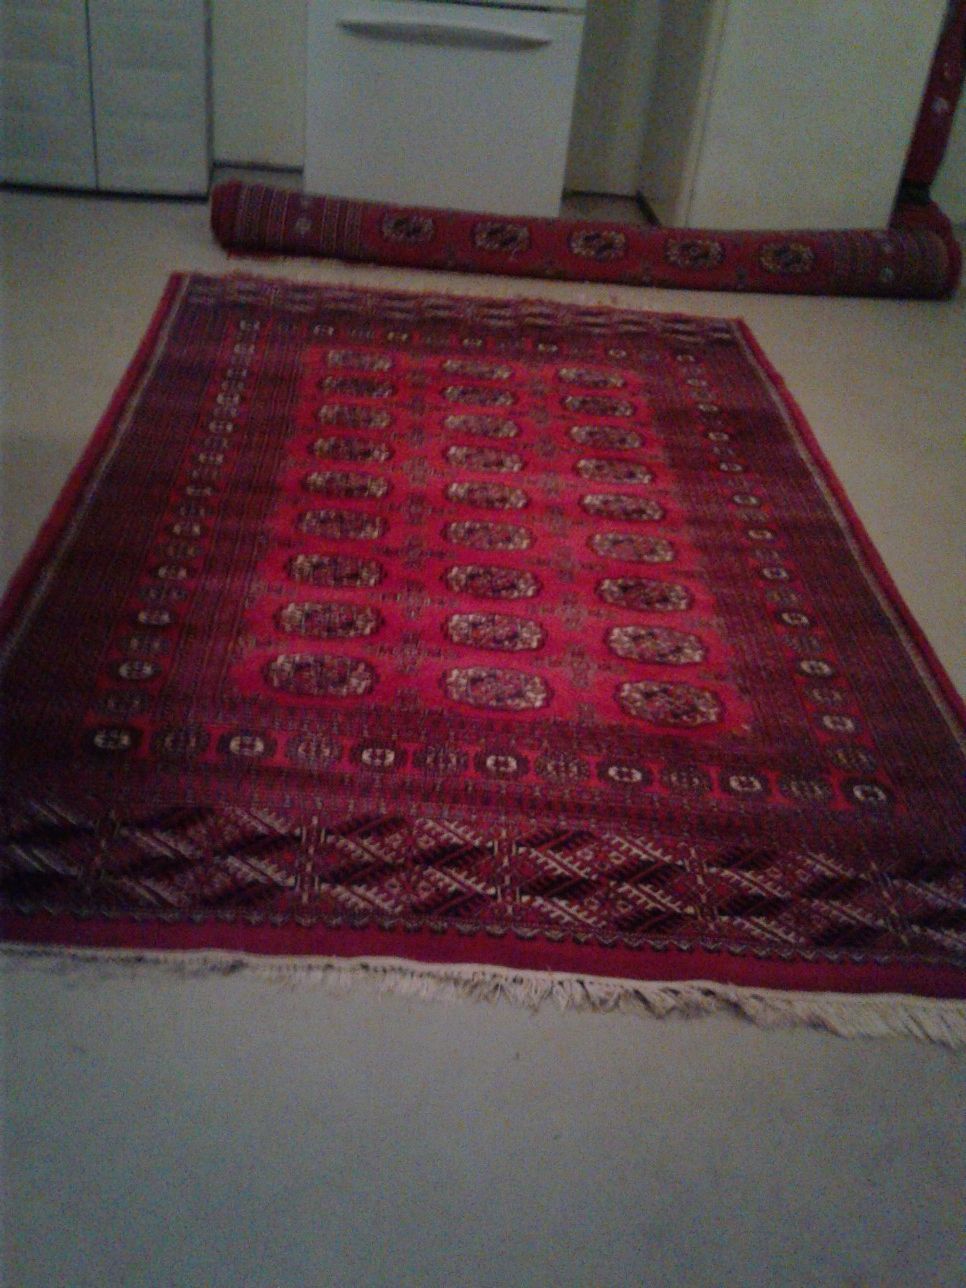 Beautiful red Afghan rug size 8 by1o foot